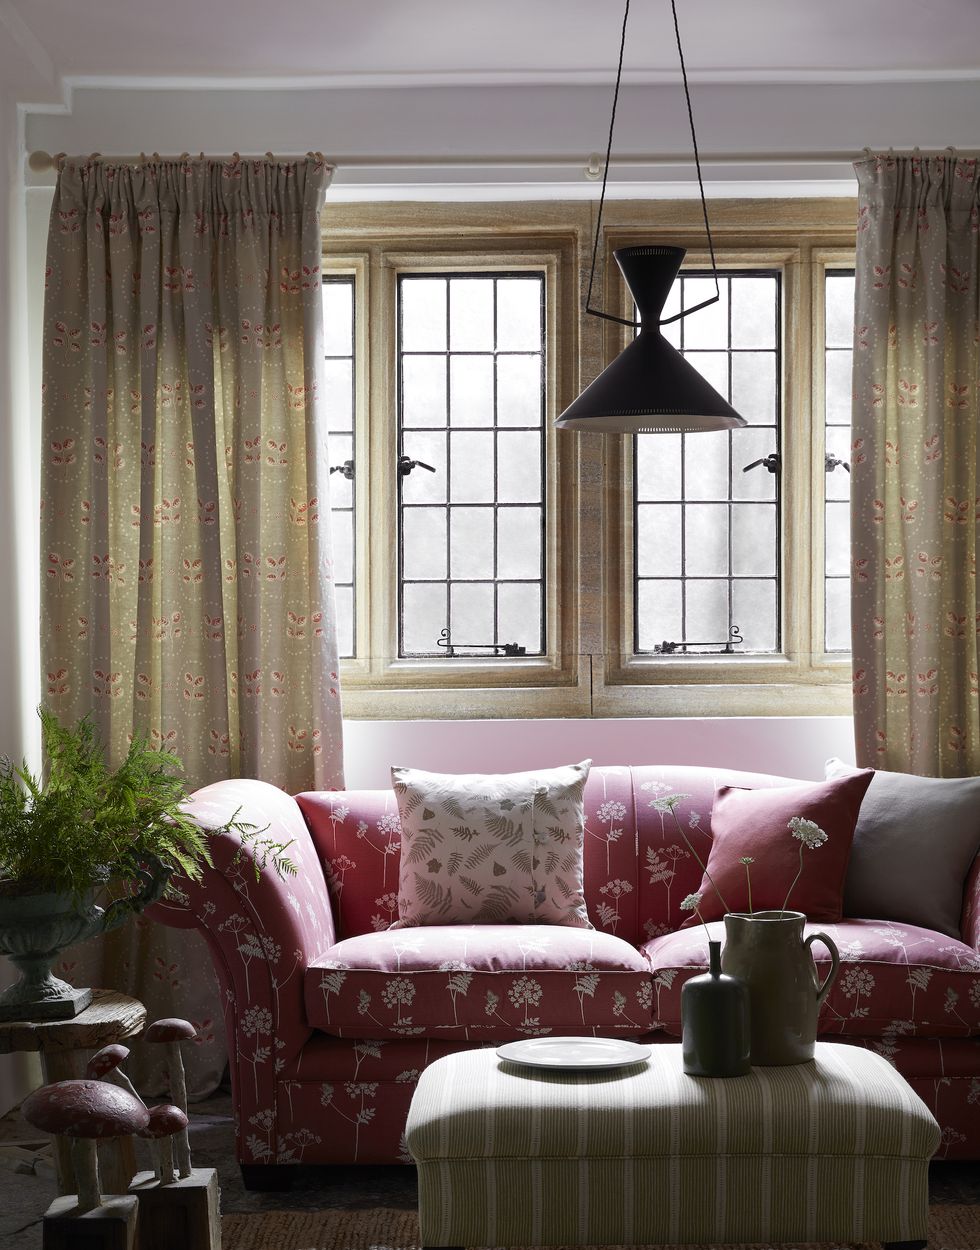 Why Cow Parsley Print Is A Timeless Summer's Interiors Trend